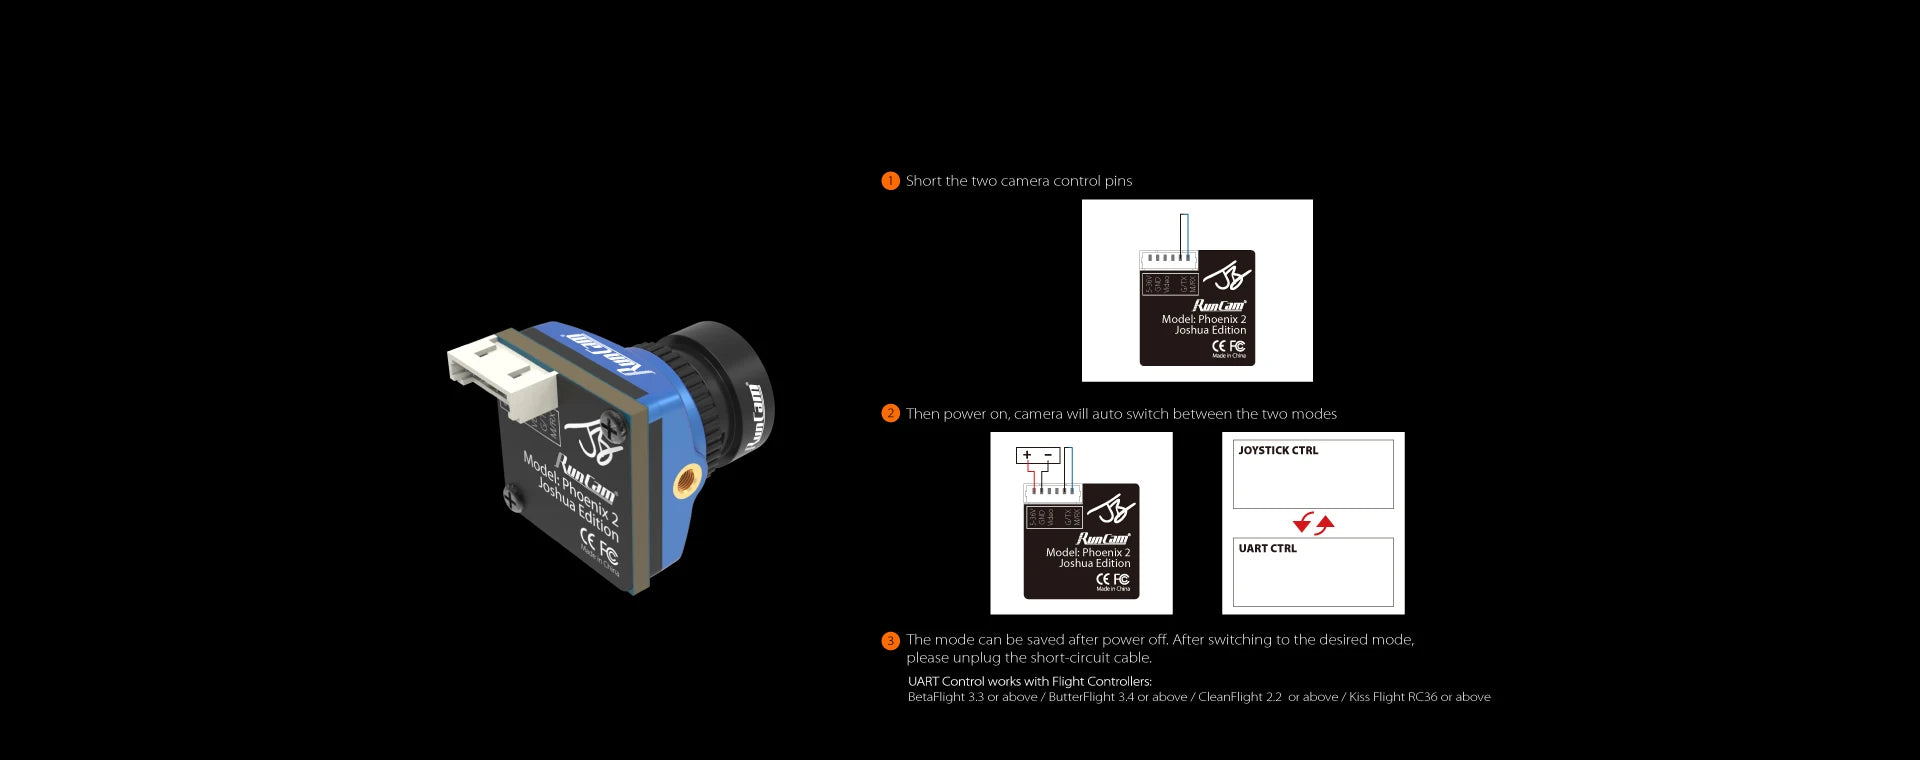 RunCam Phoenix 2 Analog FPV Camera, camera will automatically switch between two control pins when camera is powered on .